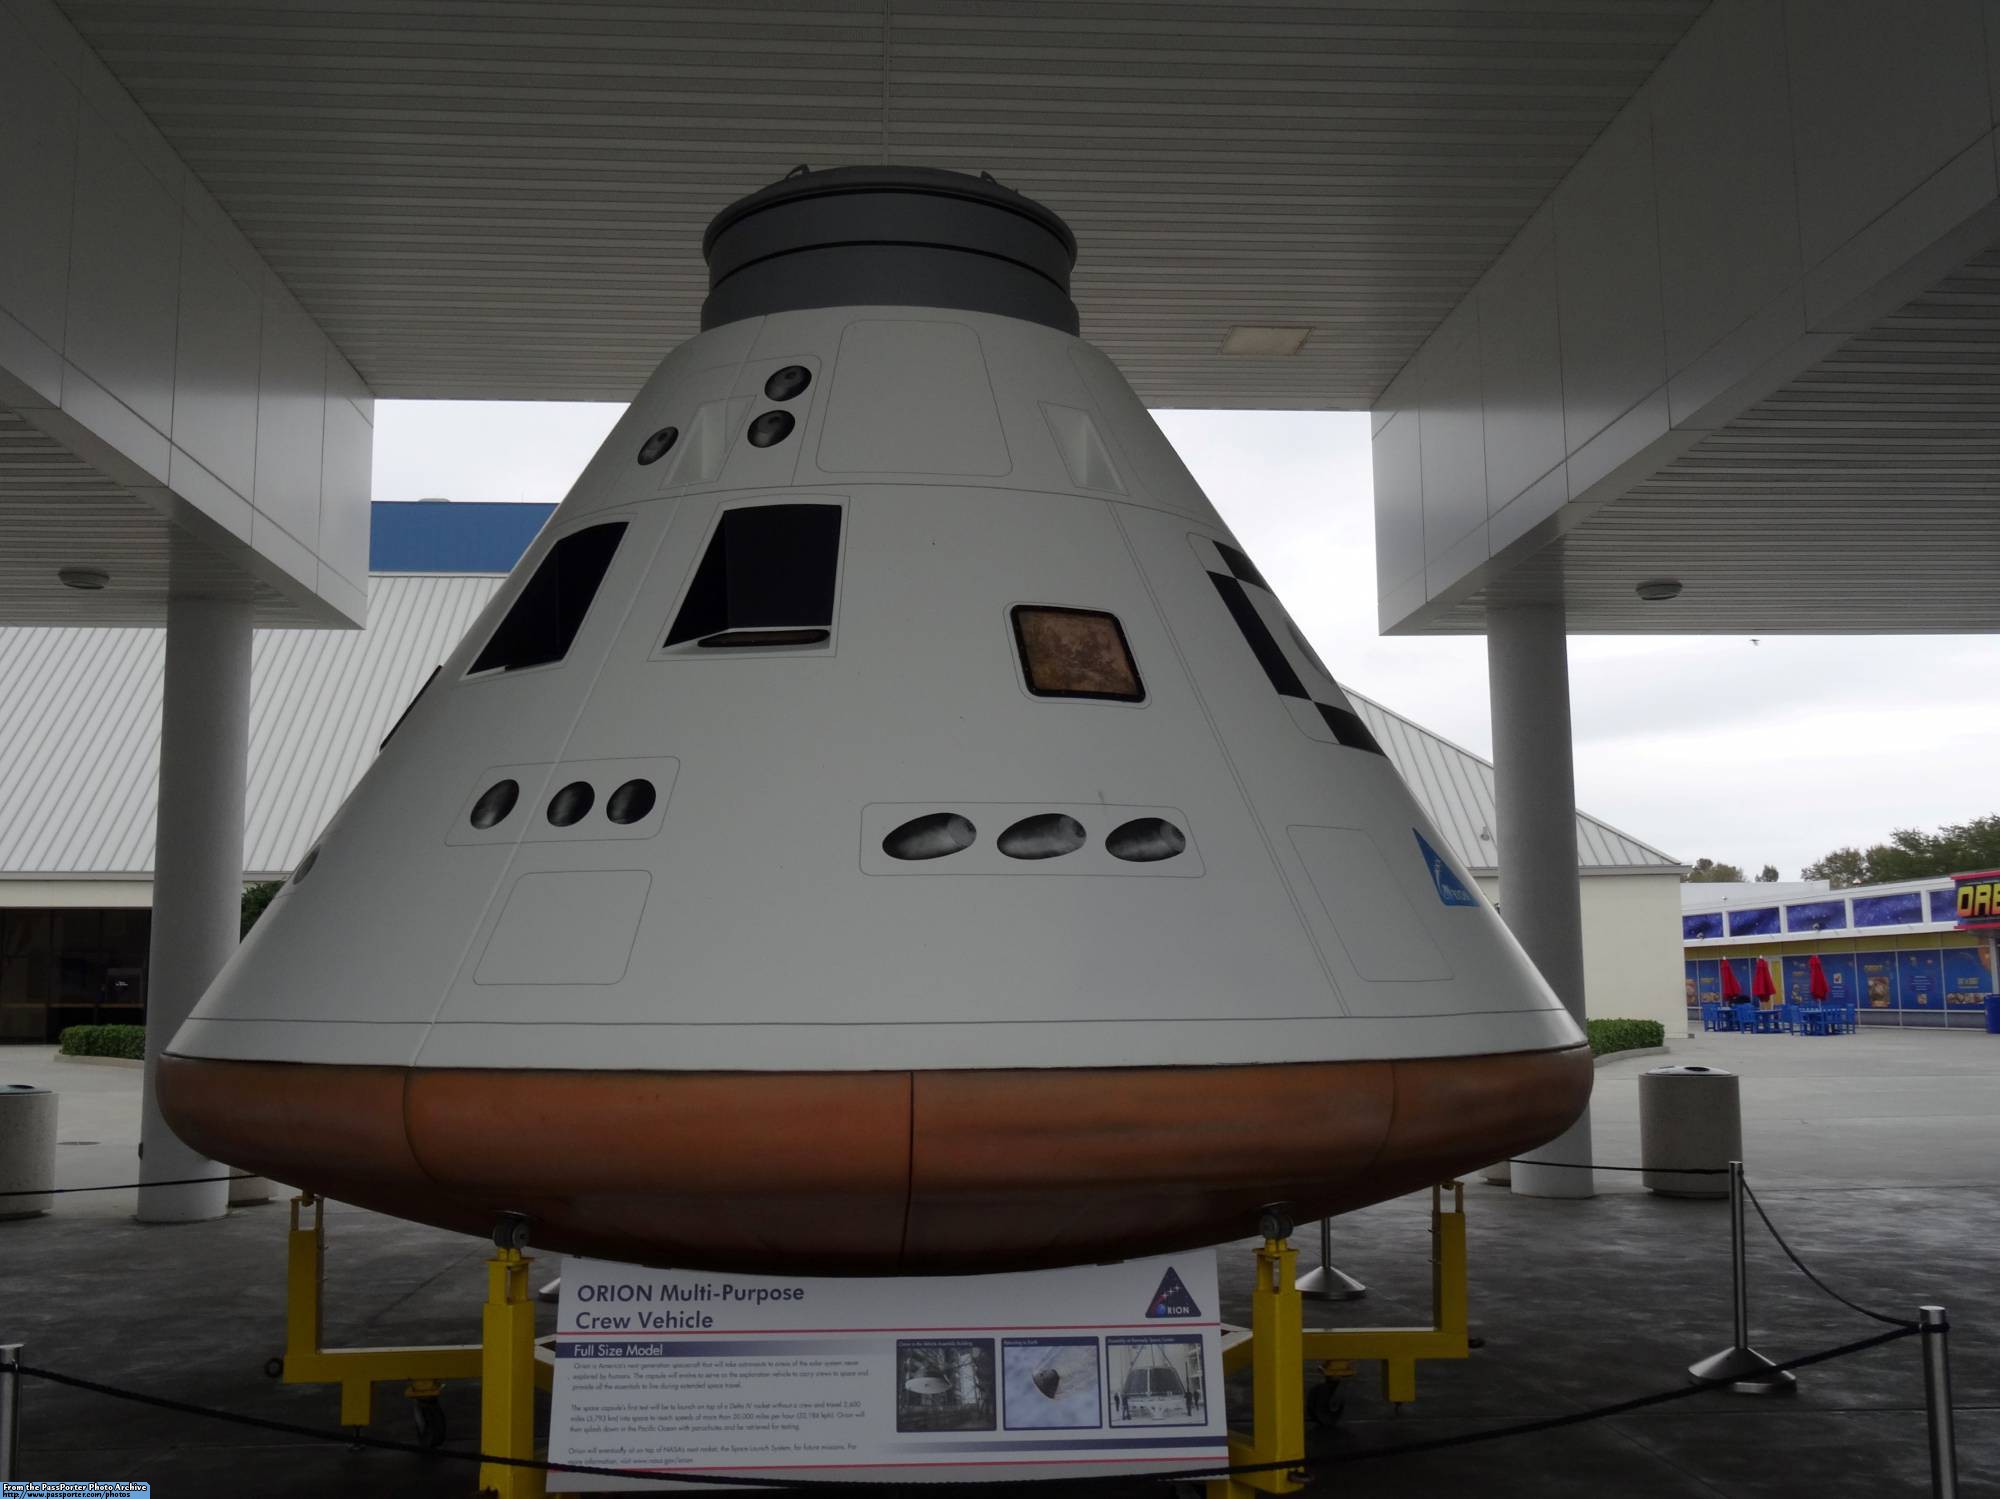 Kennedy Space Center – Orion vehicle